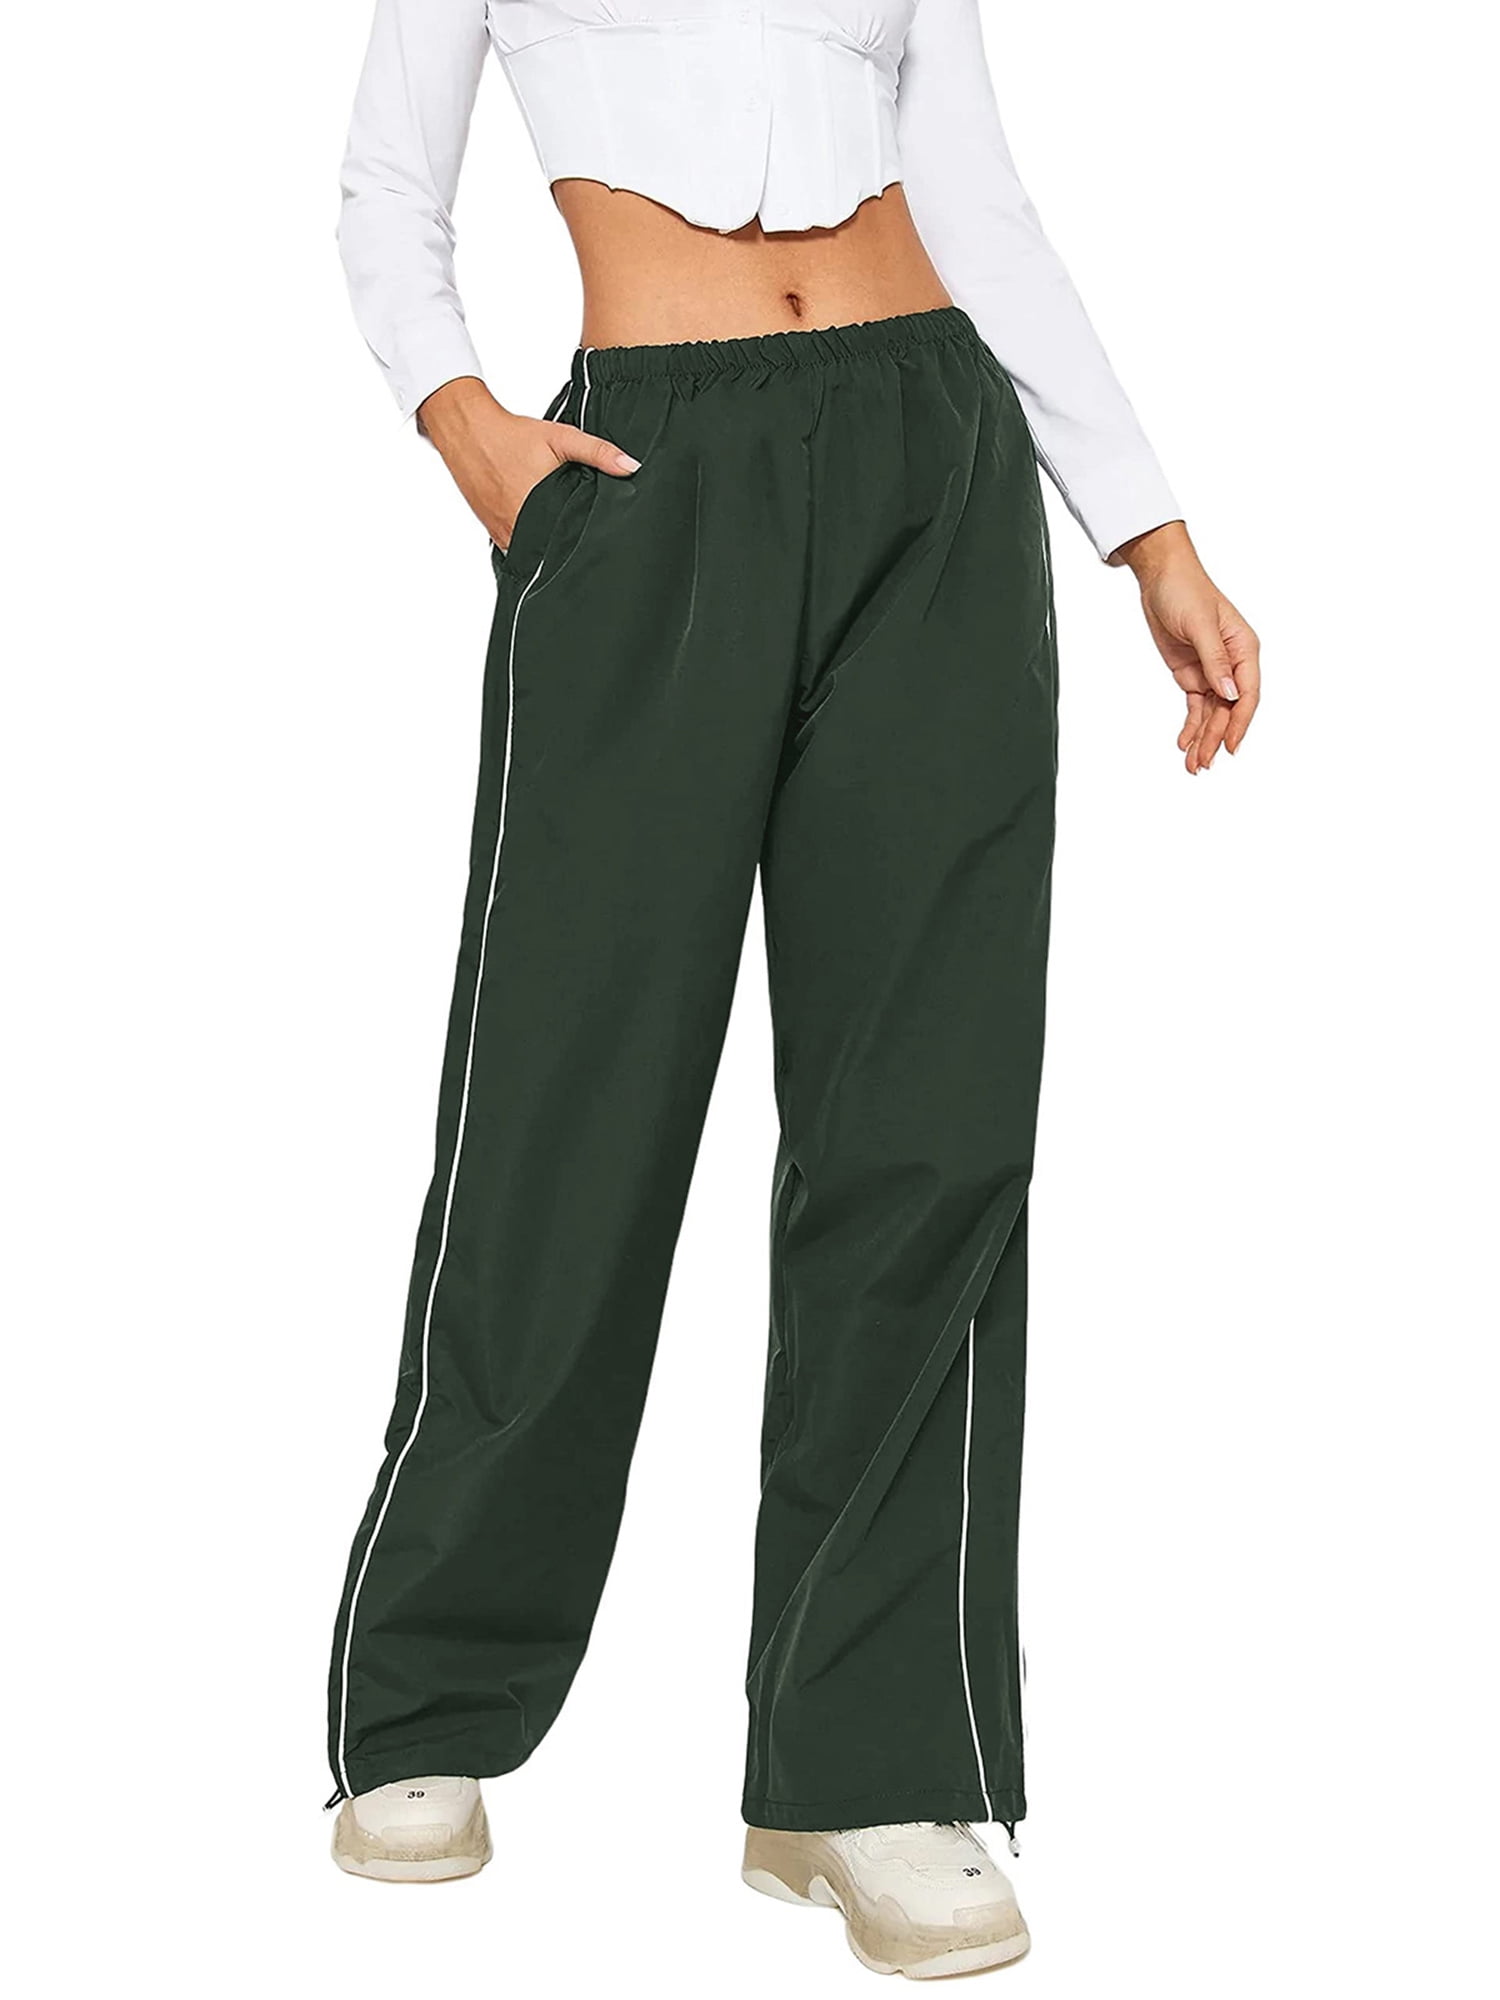 wybzd Women Baggy Parachute Pants Low Rise Y2K Cargo Pants Relaxed 